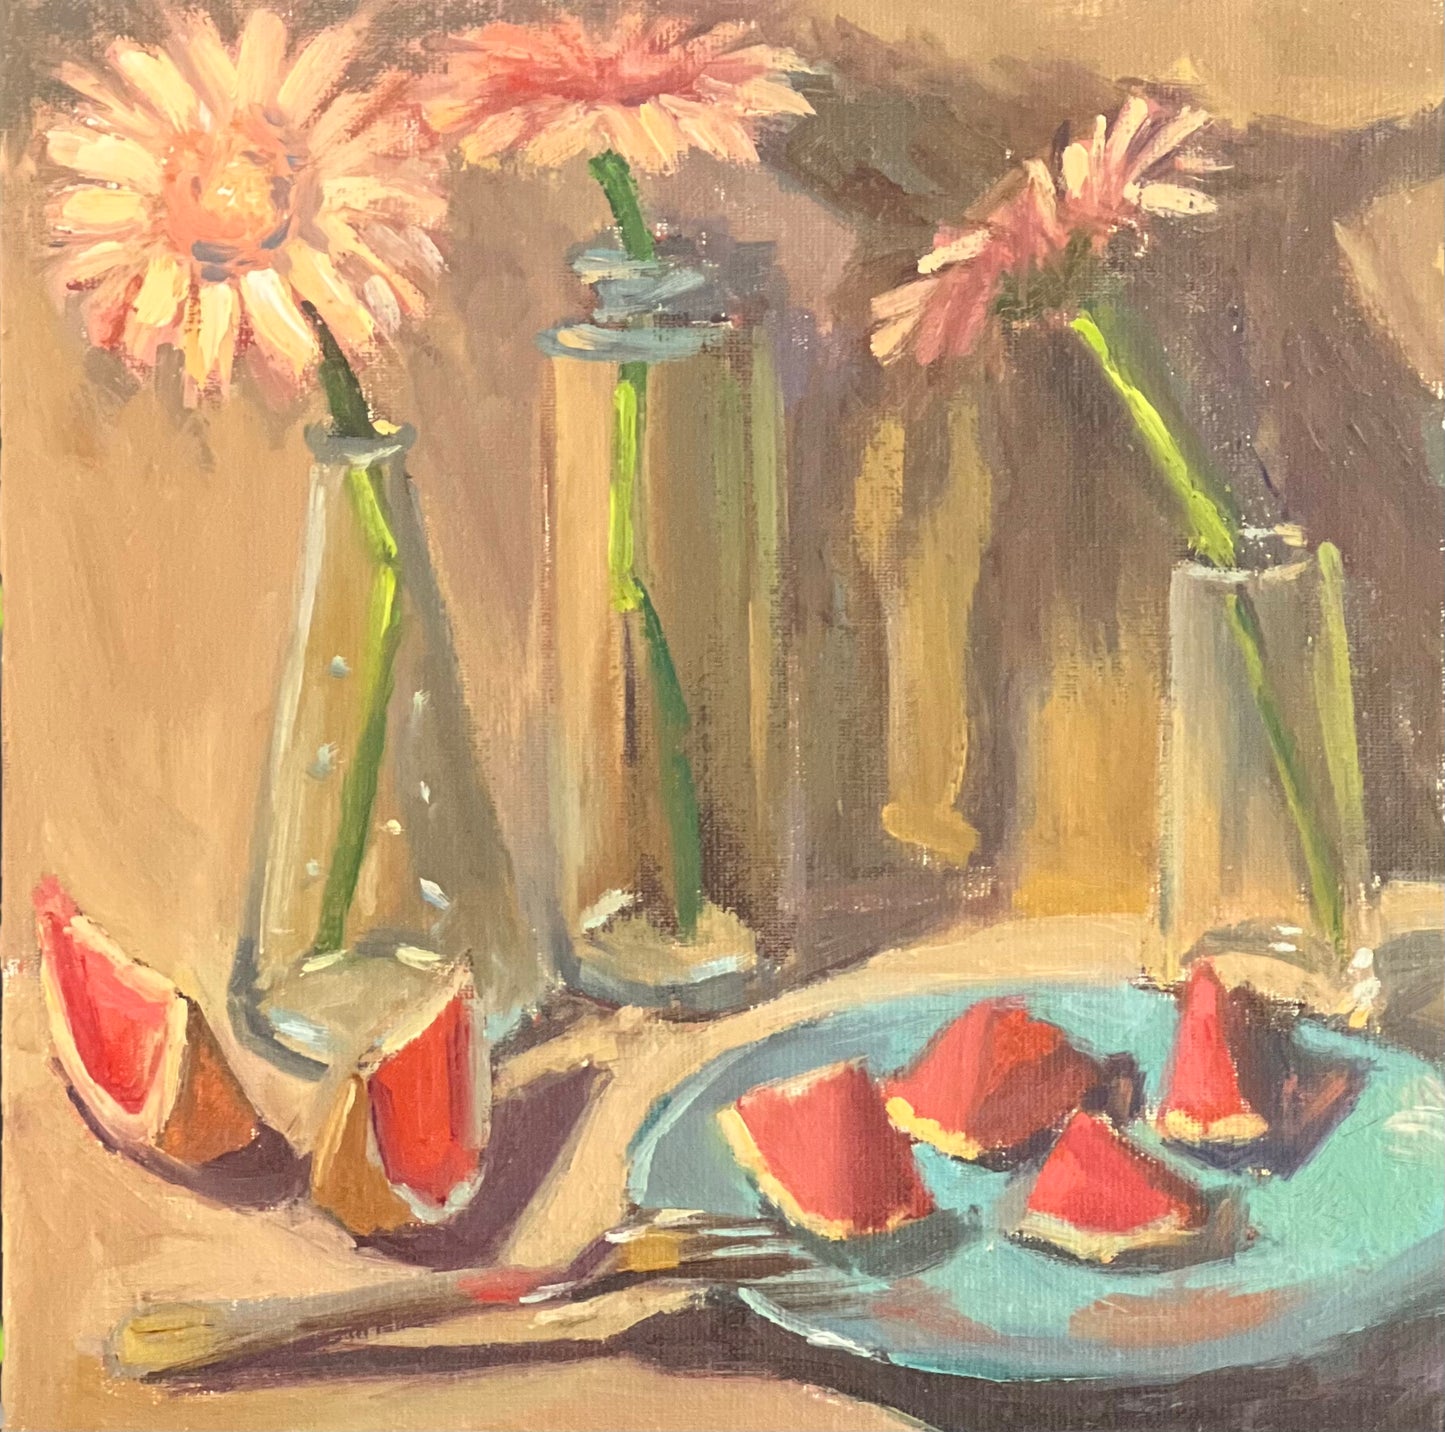 Floral oil painting - Daisies in a row!